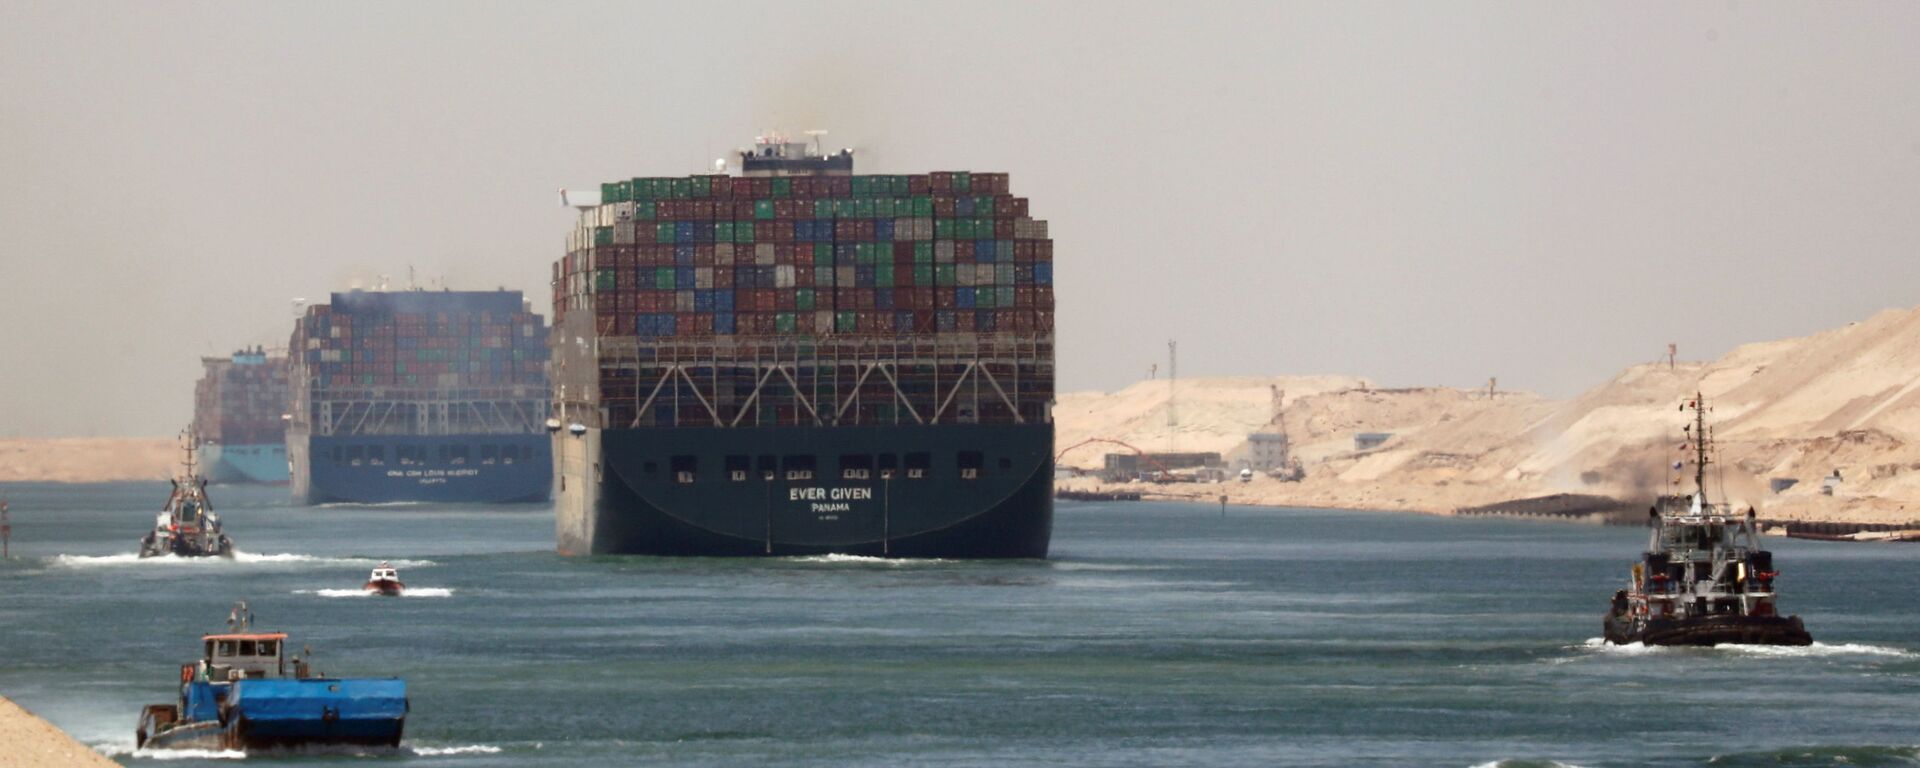 FILE PHOTO: Ever Given, one of the world's largest container ships, sets sail to leave through Suez Canal after the canal authority reached a settlement with the vessel's owner and insurers, in Ismailia, Egypt, July 7, 2021. - Sputnik International, 1920, 09.09.2021